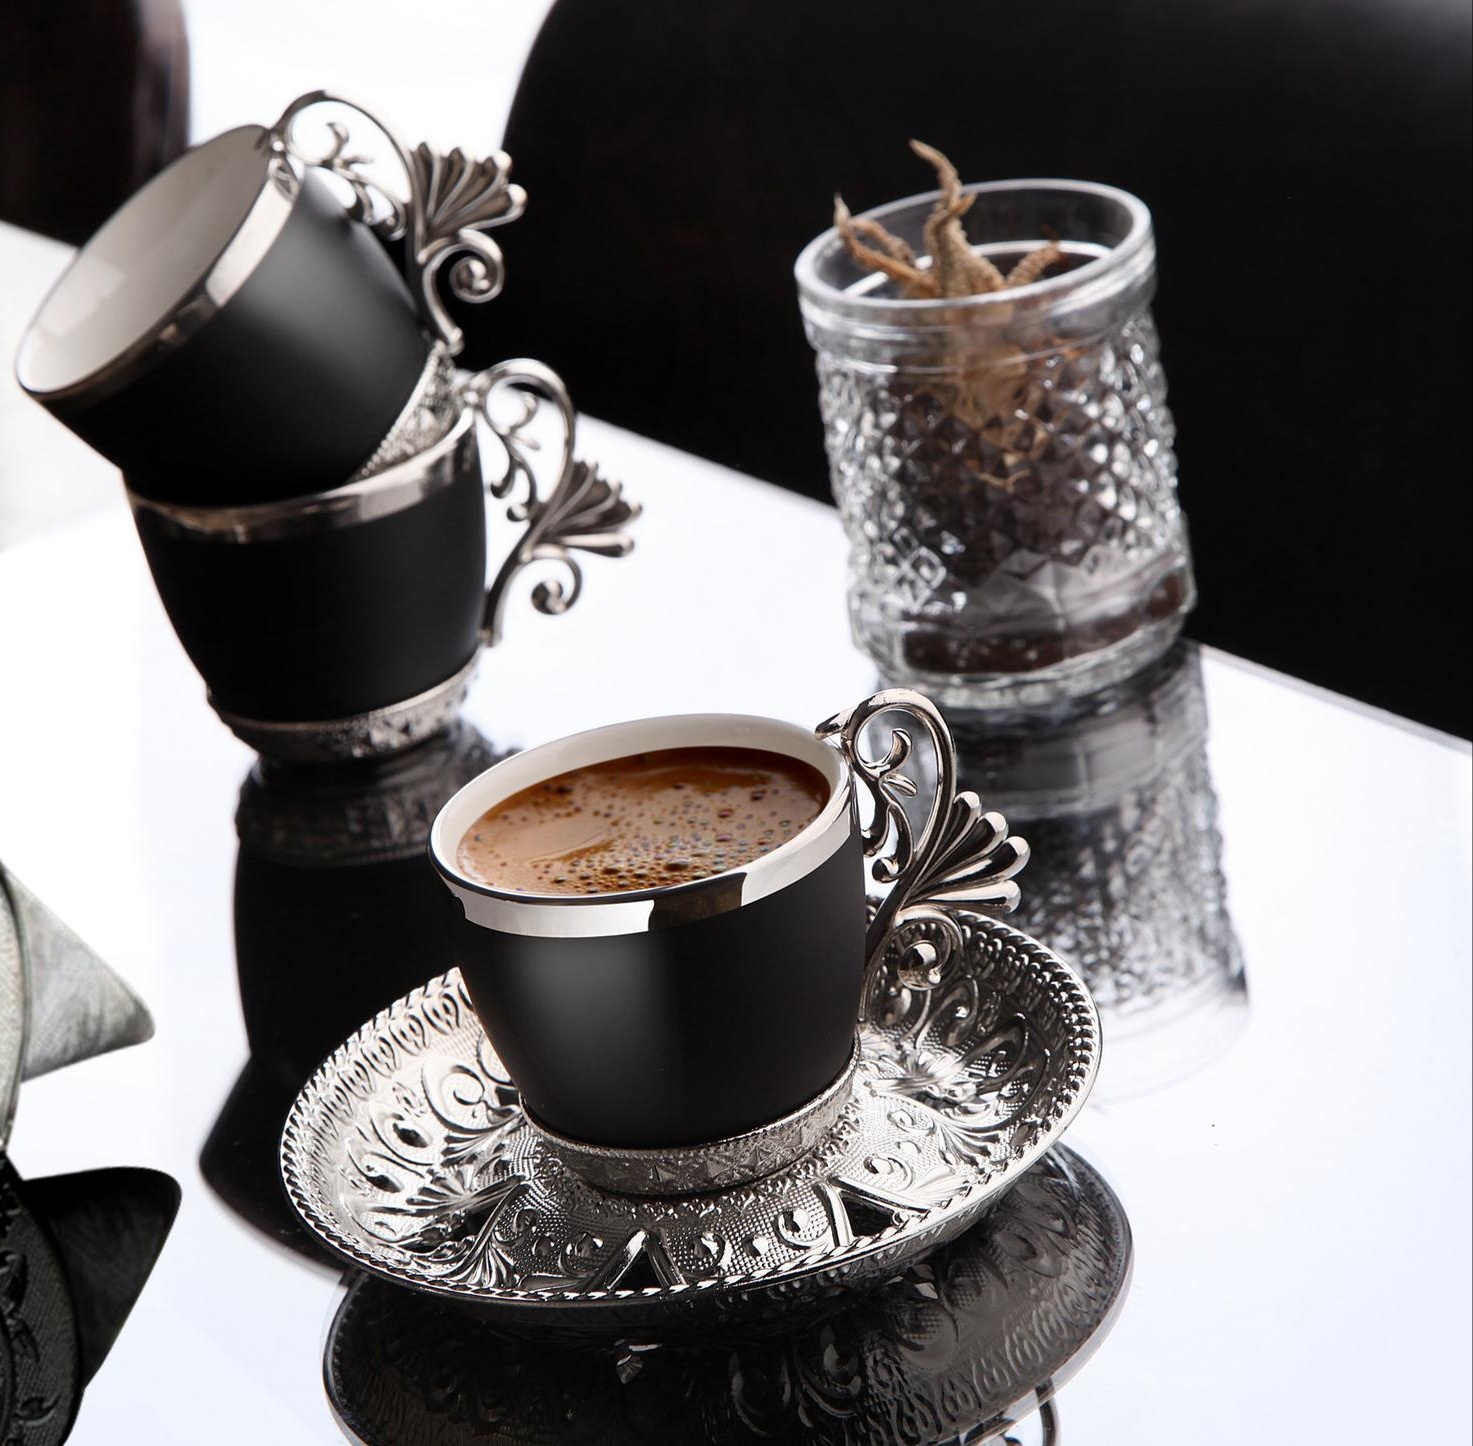 https://traditionalturk.com/wp-content/uploads/2020/04/vegatable-dyed-luxury-silver-color-coffee-set-1.jpg